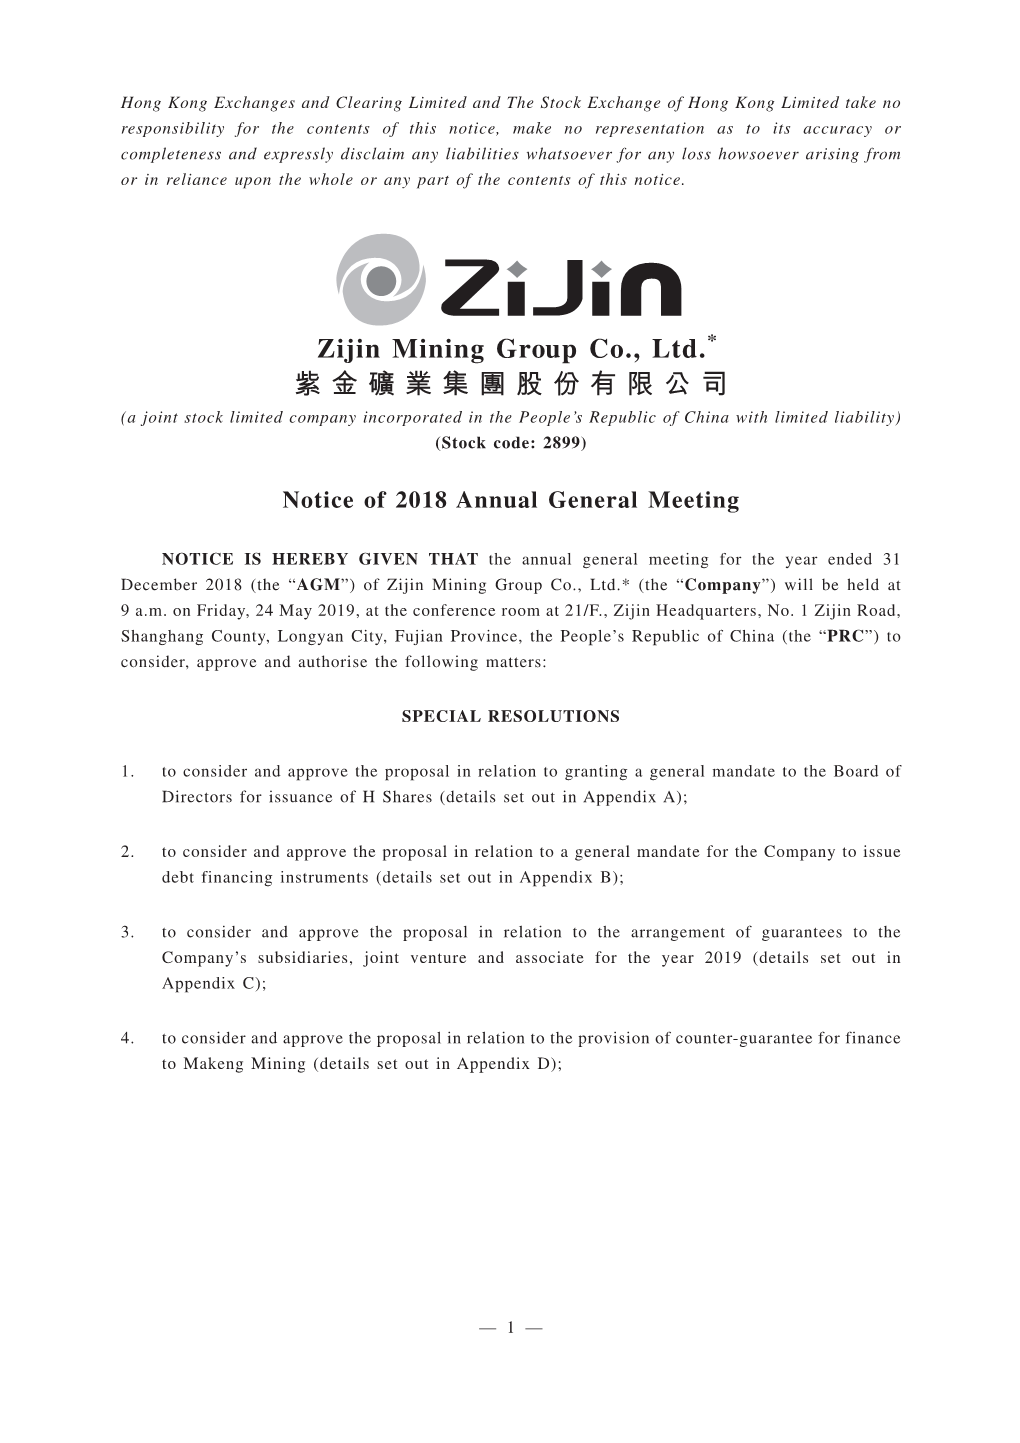 Zijin Mining Group Co., Ltd.* 紫金礦業集團股份有限公司 (A Joint Stock Limited Company Incorporated in the People’S Republic of China with Limited Liability) (Stock Code: 2899)